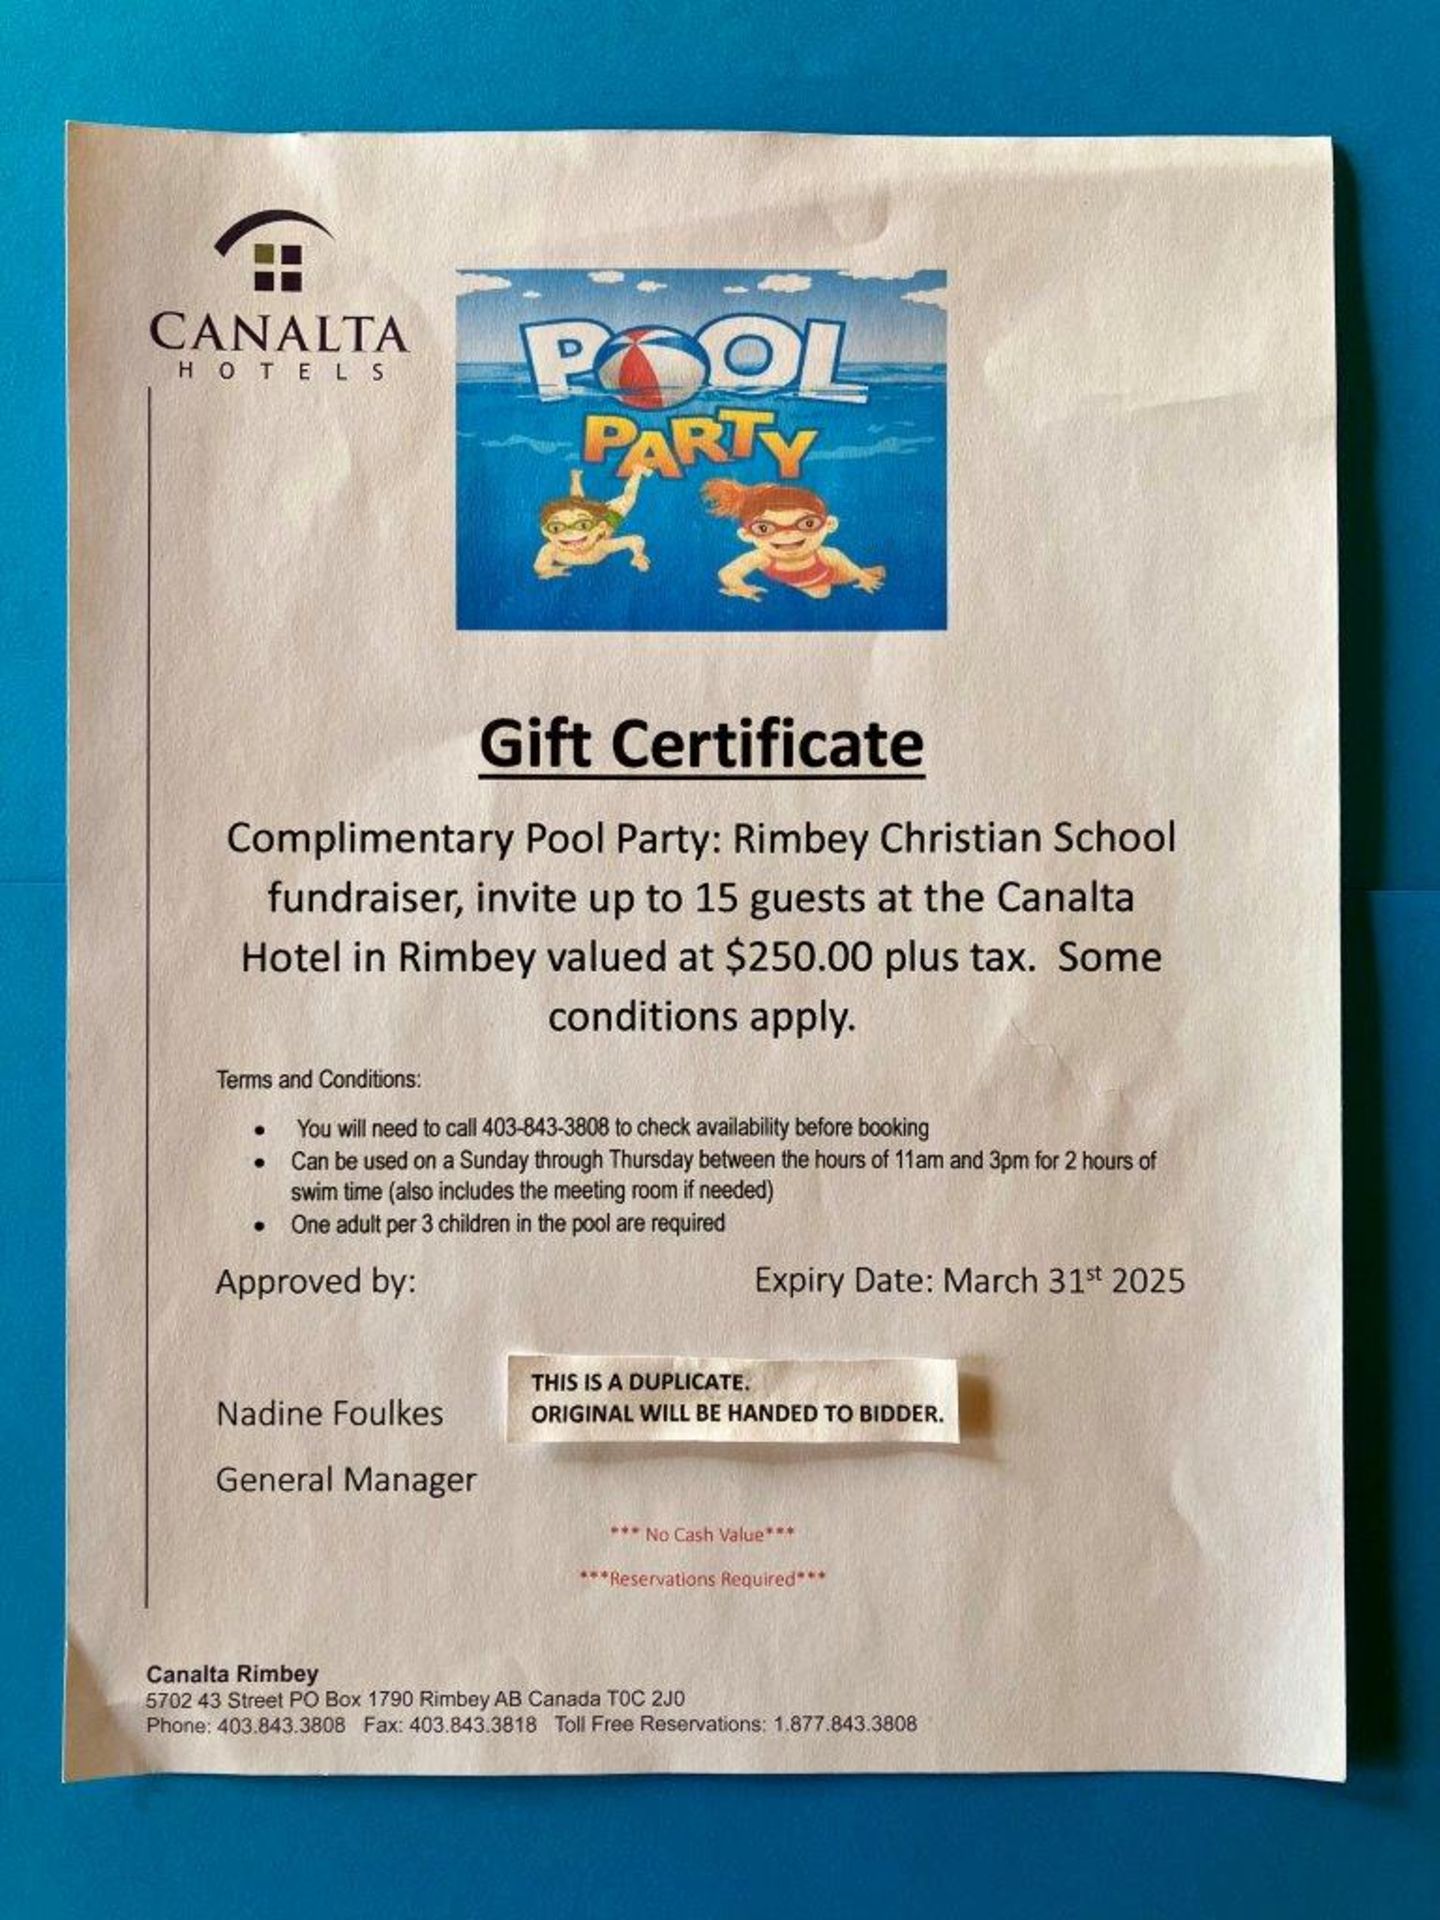 CANALTA HOTELS (RIMBEY) POOL PARTY GIFT CERTIFICATE